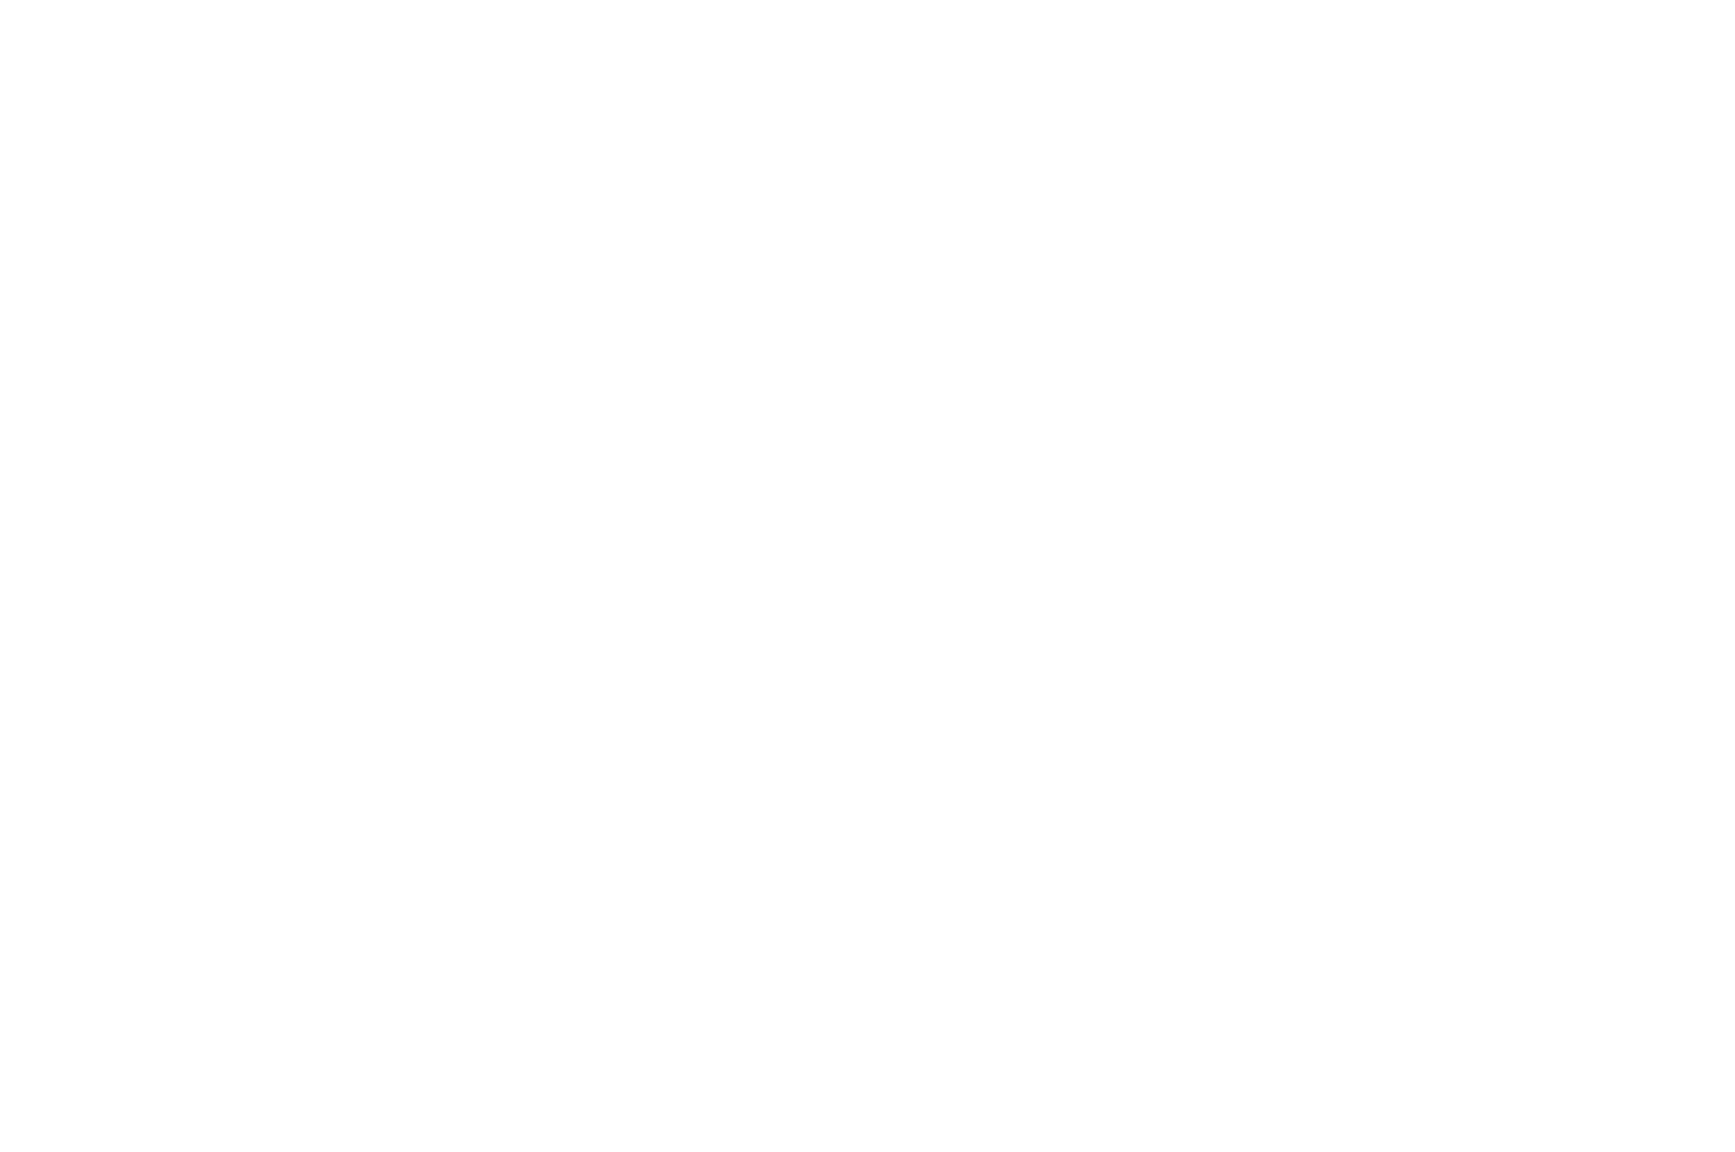 HONORABLE MENTION - 15 Minutes of Fame - 2022.png